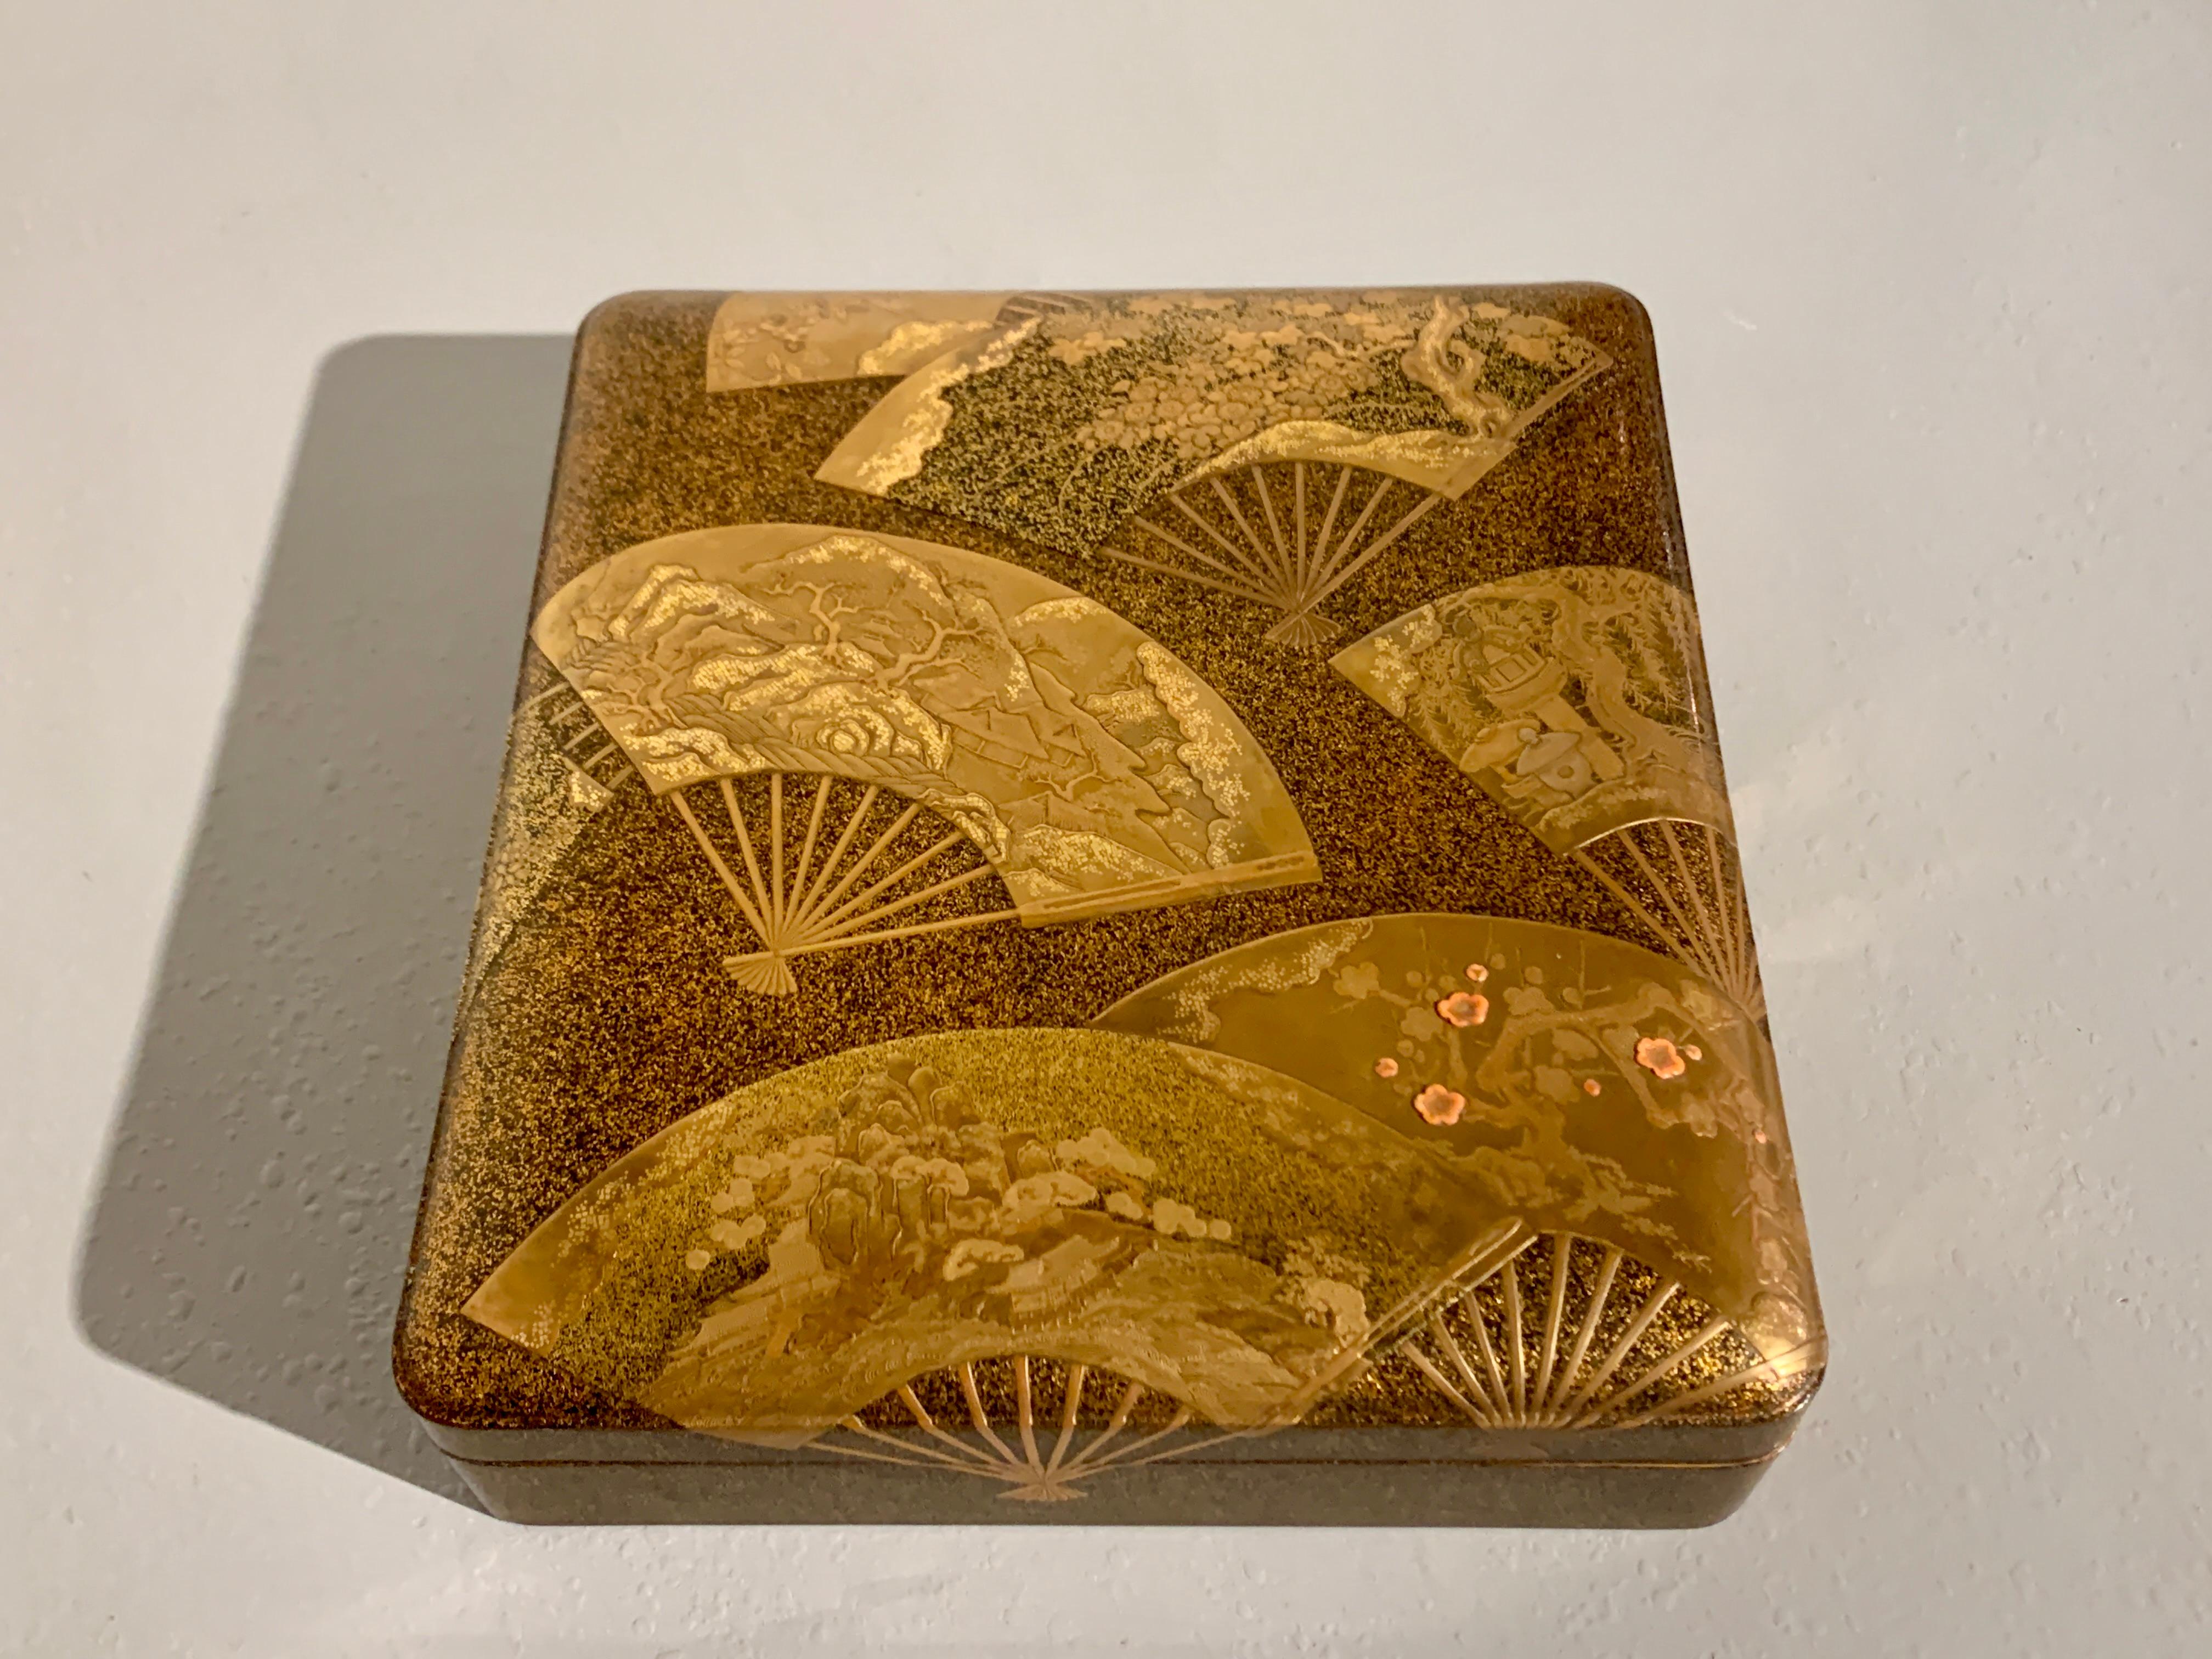 A spectacular Japanese maki-e lacquer lidded box, possibly a writing box, suzuribako, decorated with images of folding fans, ogi, Edo Period, early 19th century, Japan.

The low, rectangular box with rounded corners, sumptuously decorated in maki-e